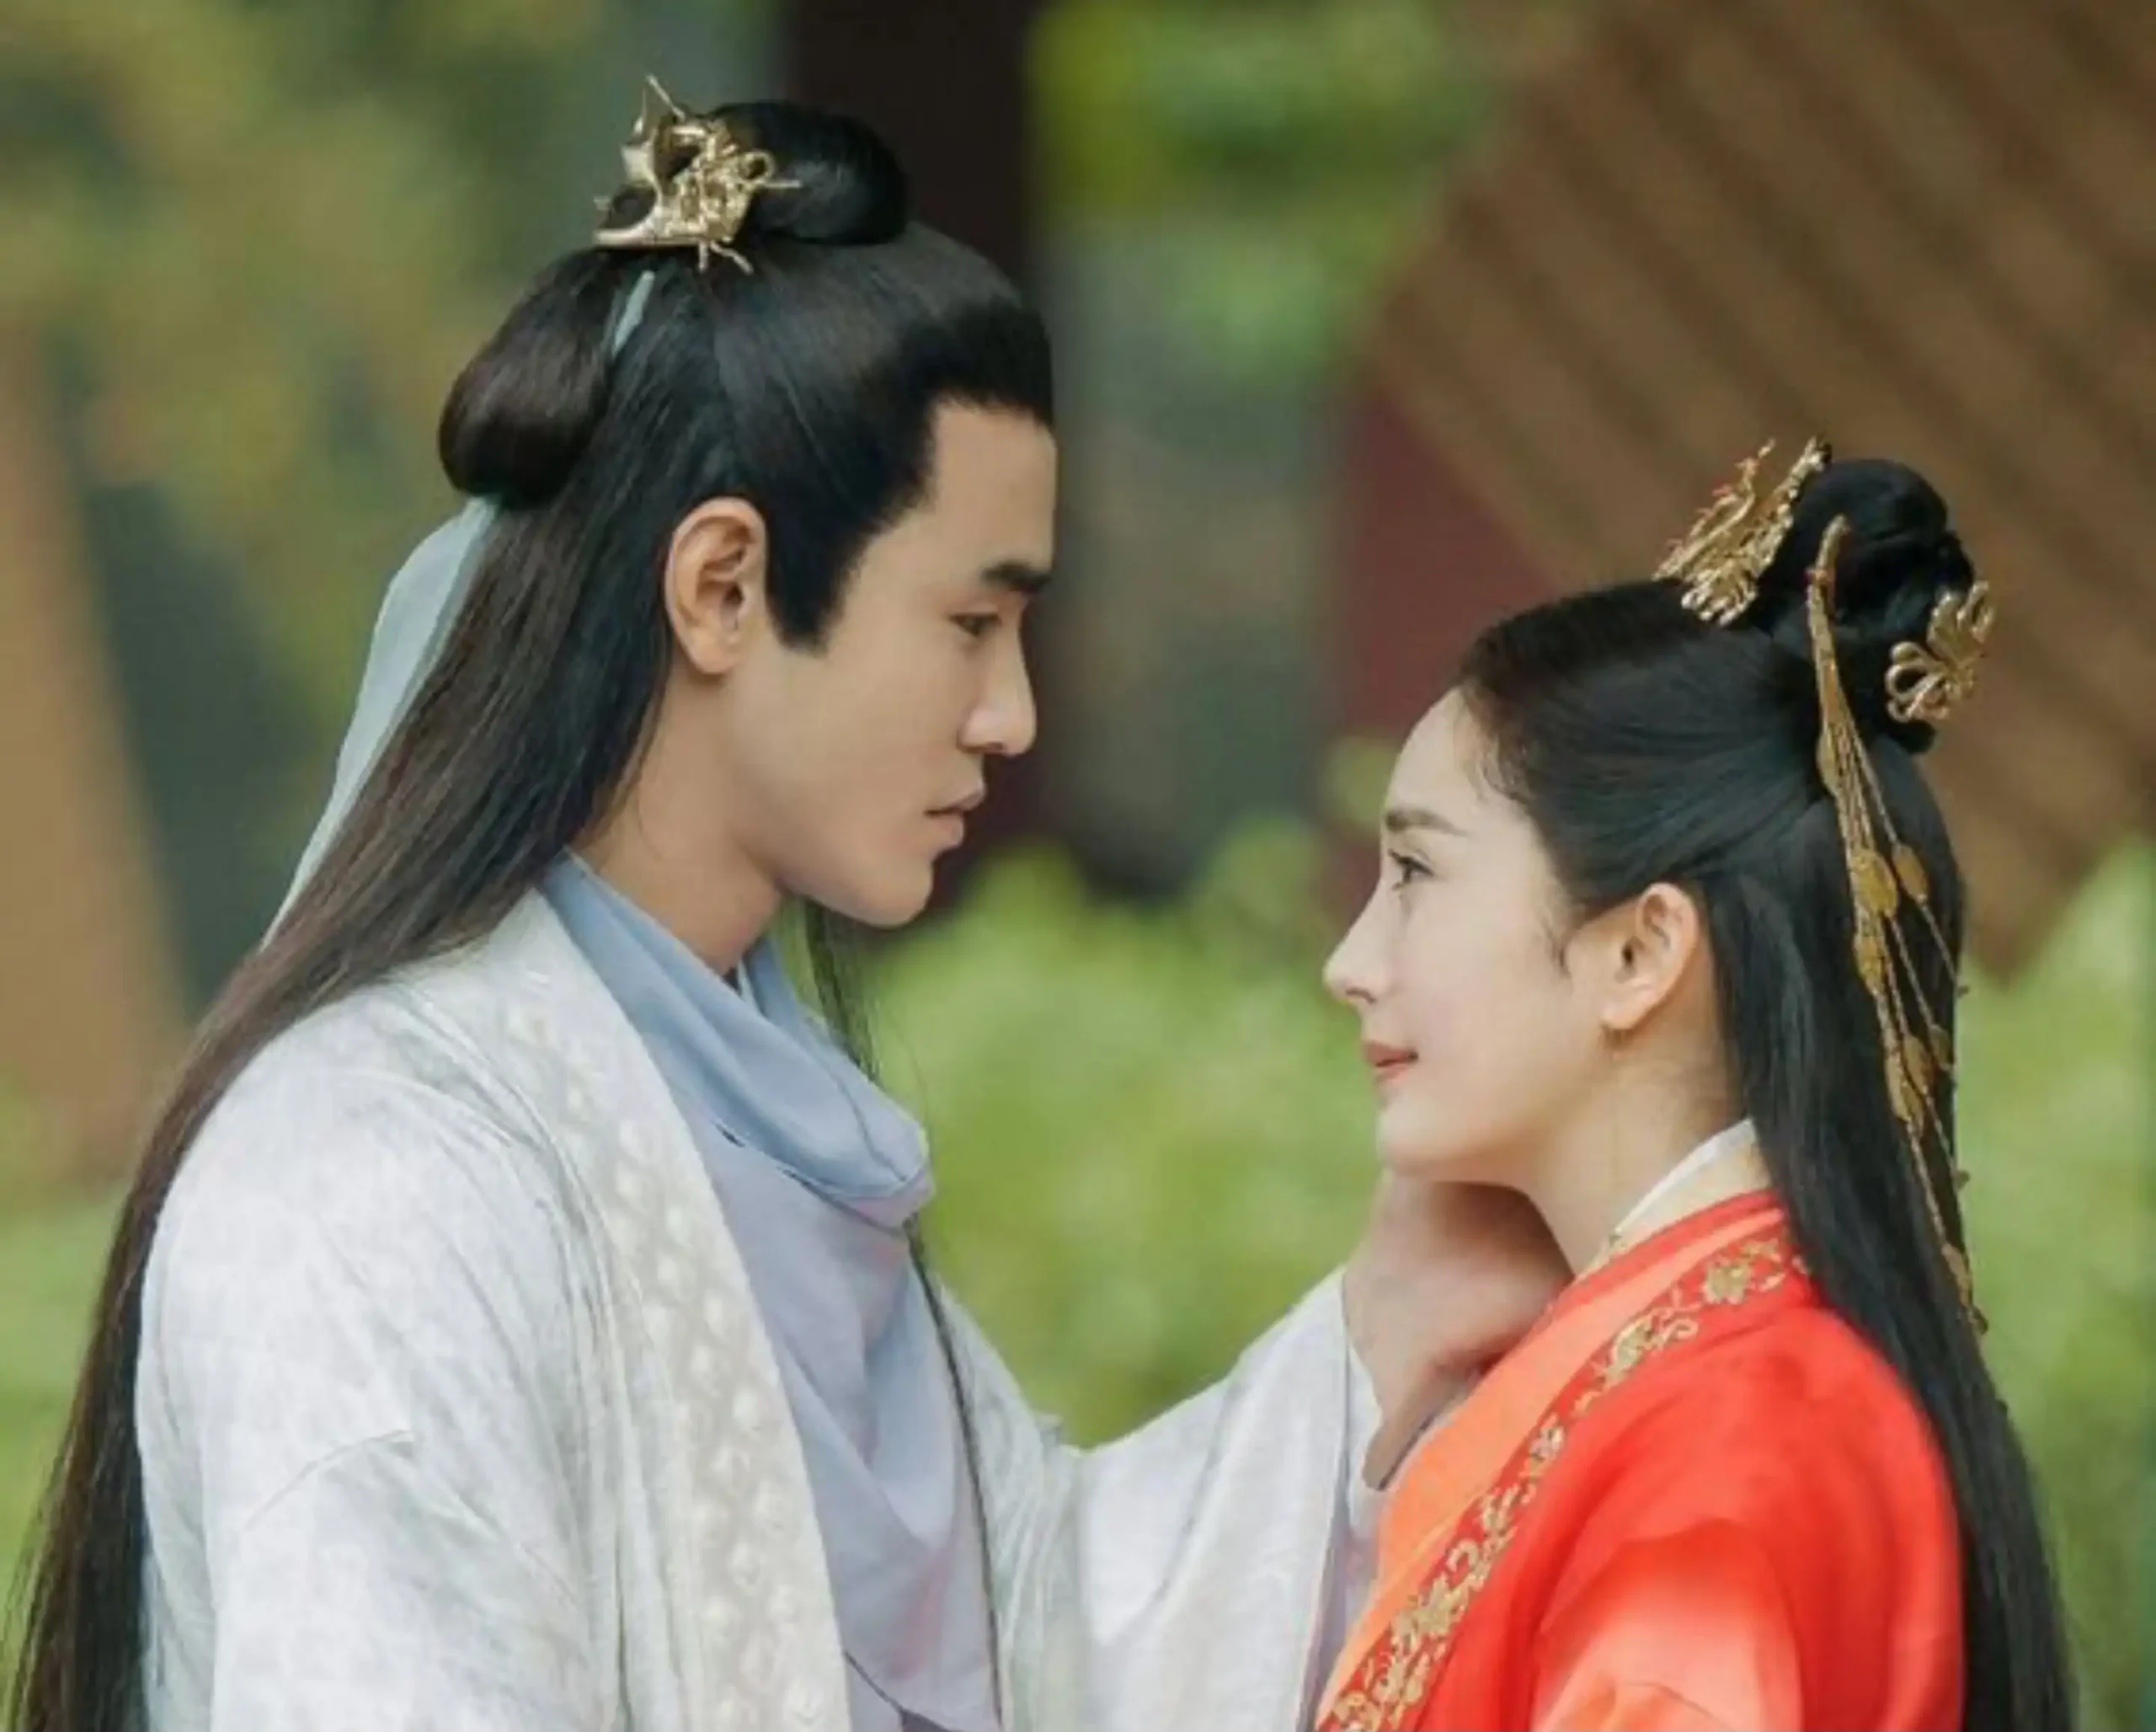 English Dubbed Chinese dramas available on YouTube to watch now